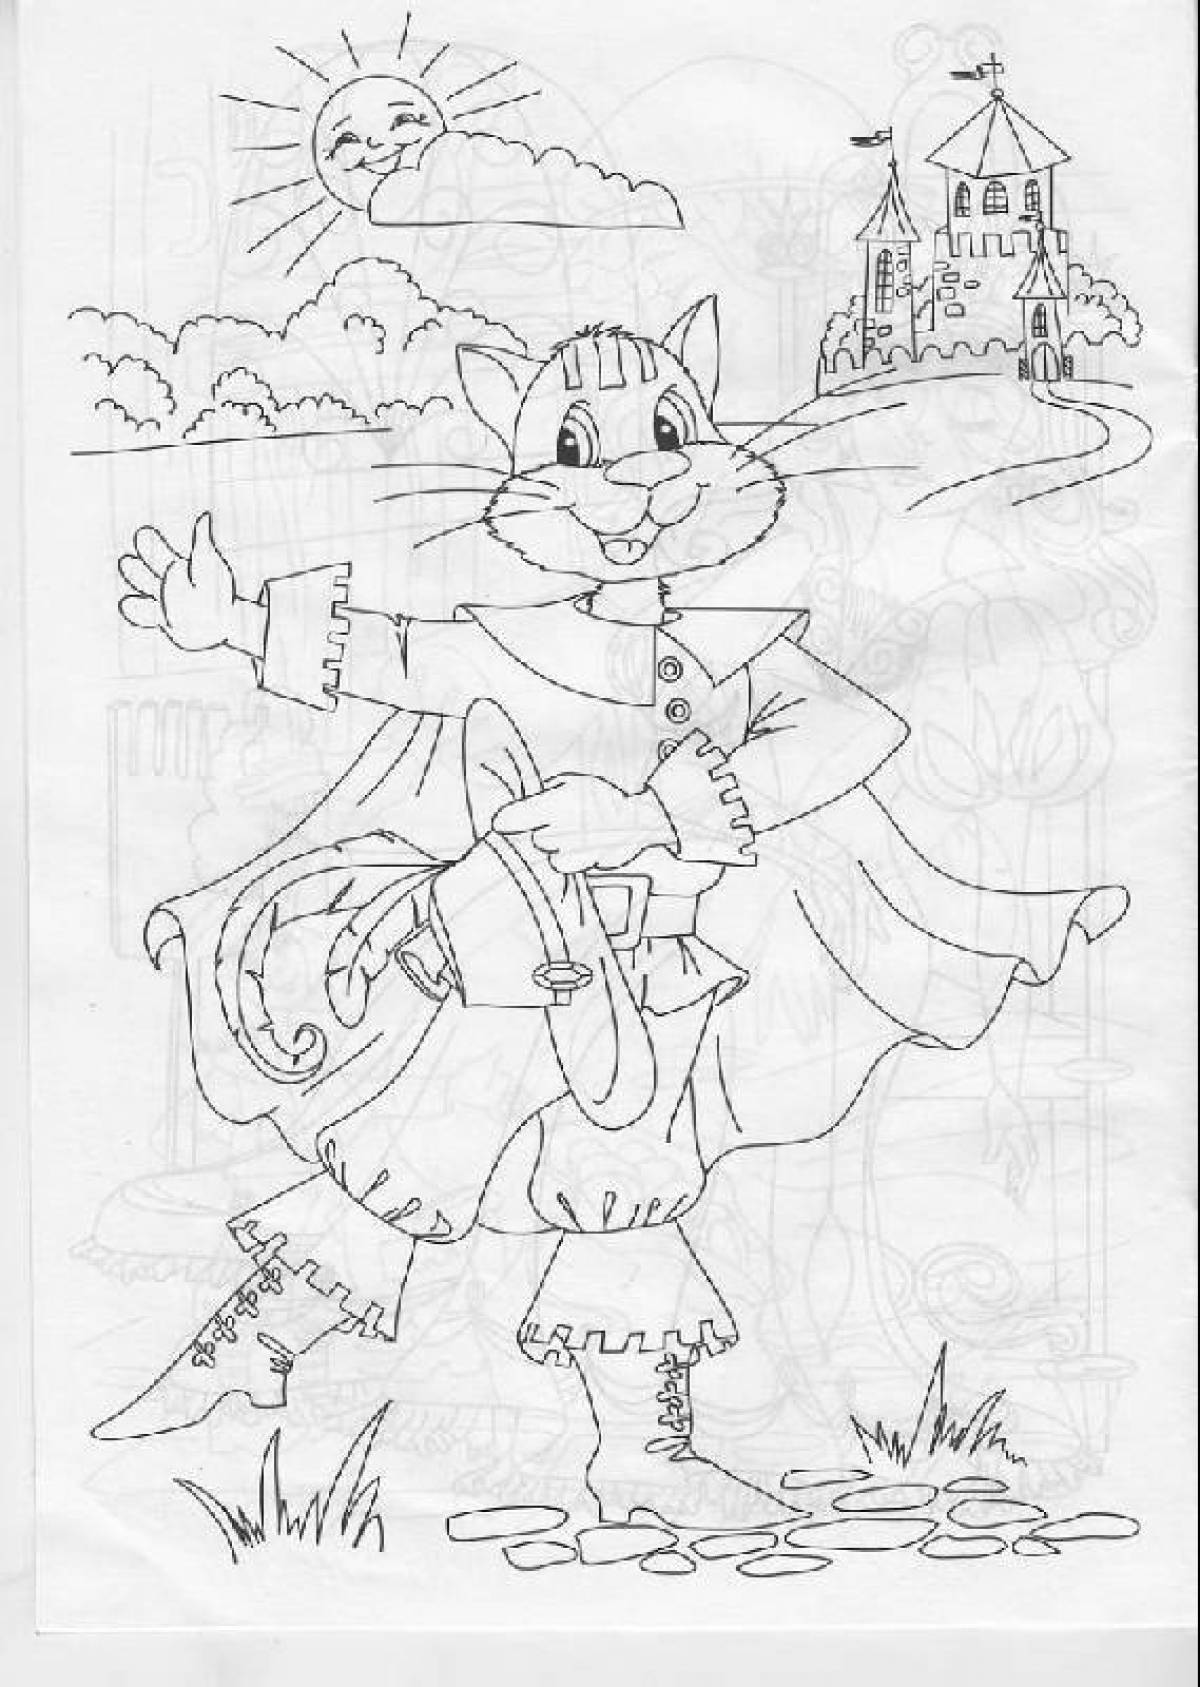 Charles Perrault's charming coloring pages